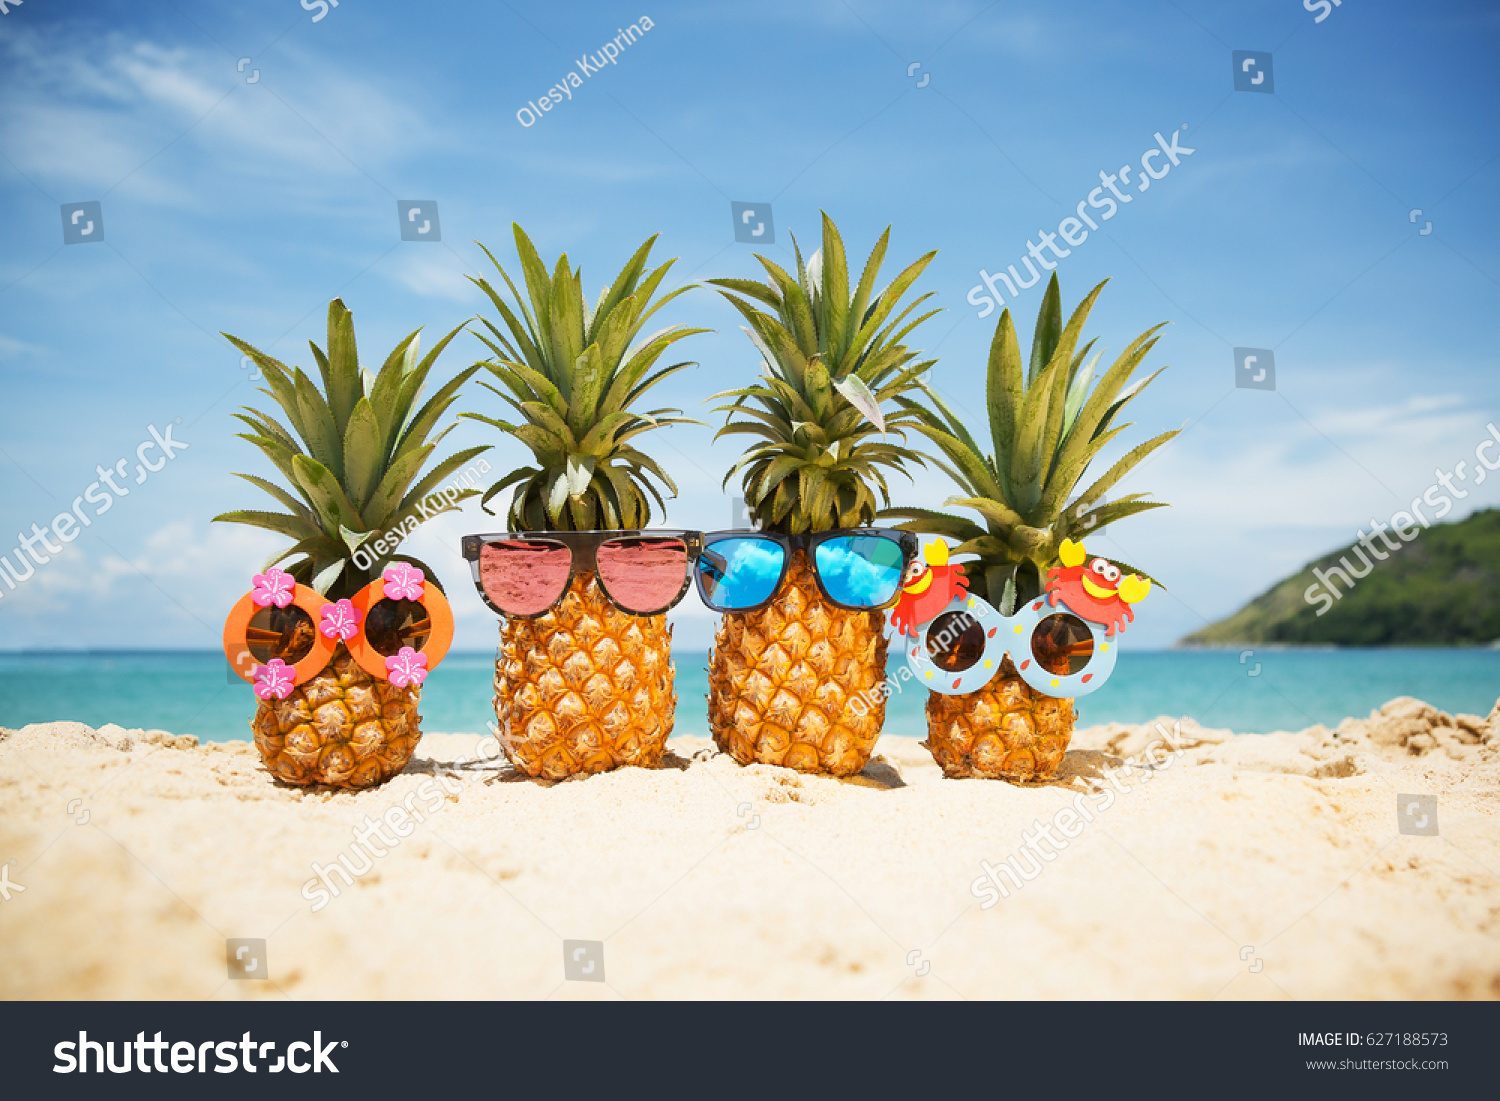 Family of funny attractive pineapples in stylish sunglasses on the sand against turquoise sea. Tropical summer vacation concept. Happy sunny day on the beach of tropical island. Family holiday #627188573